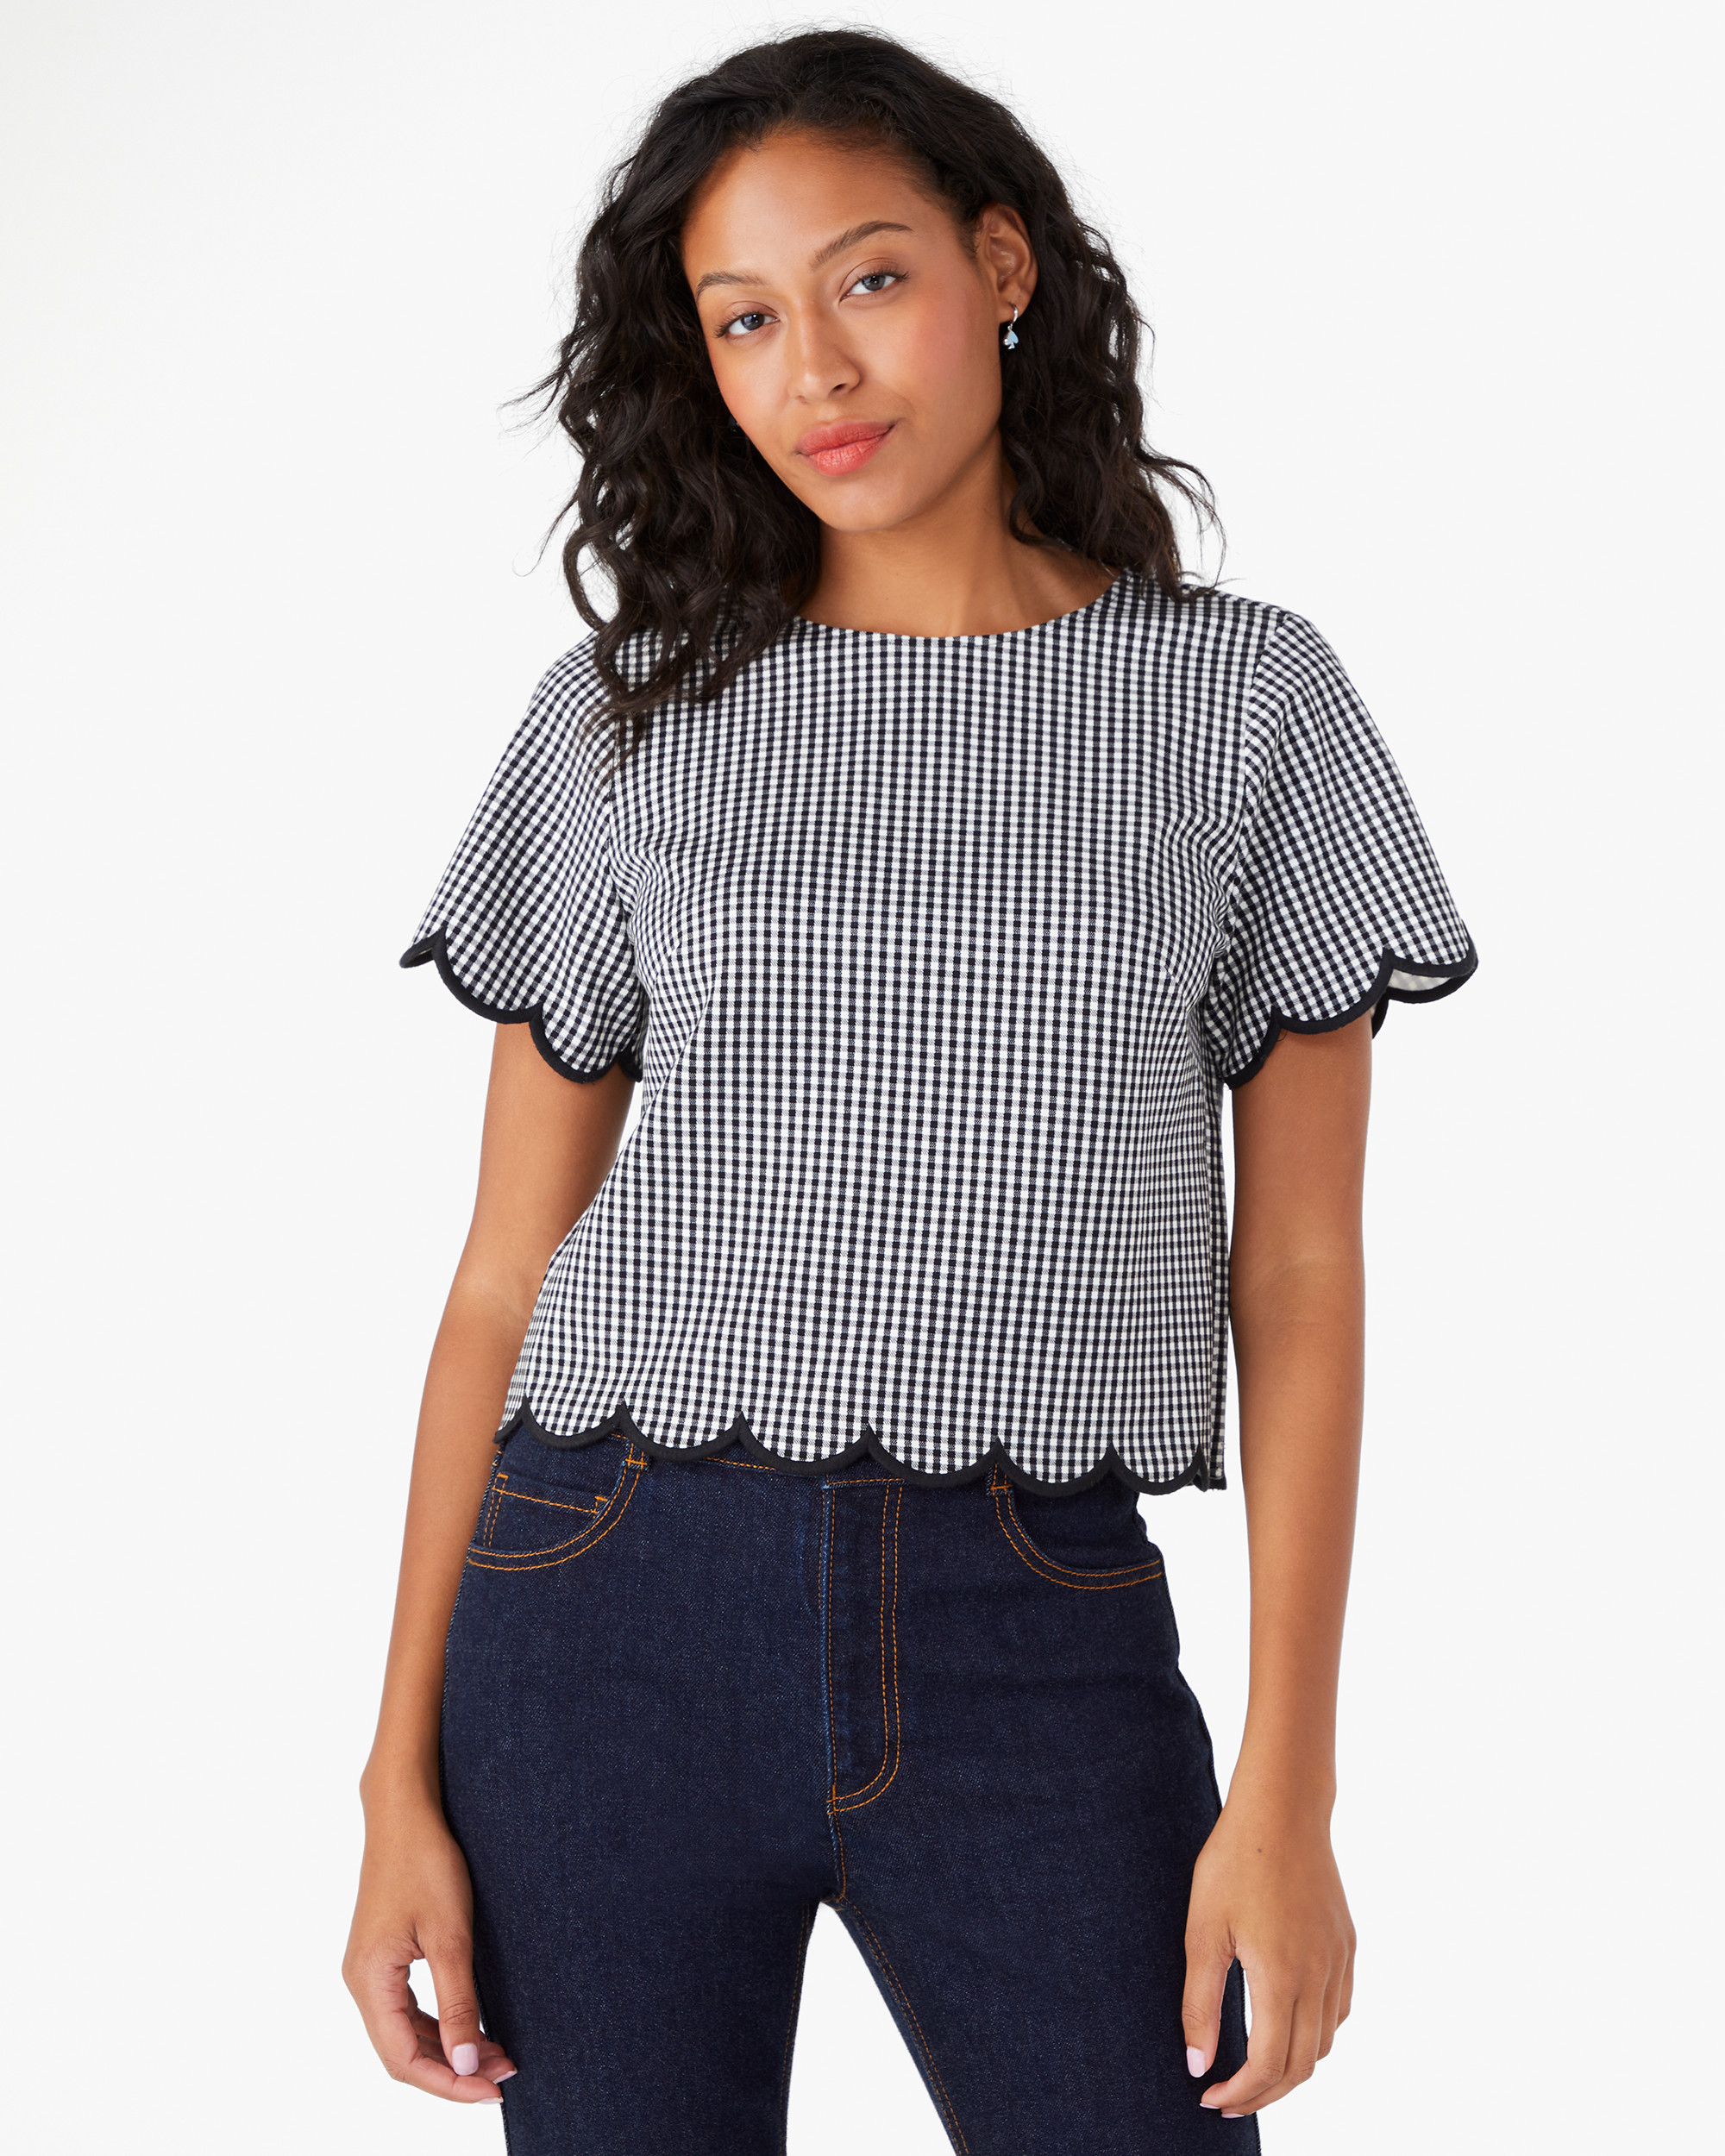 Kate Spade Jazzy Gingham Scalloped Ponte Top